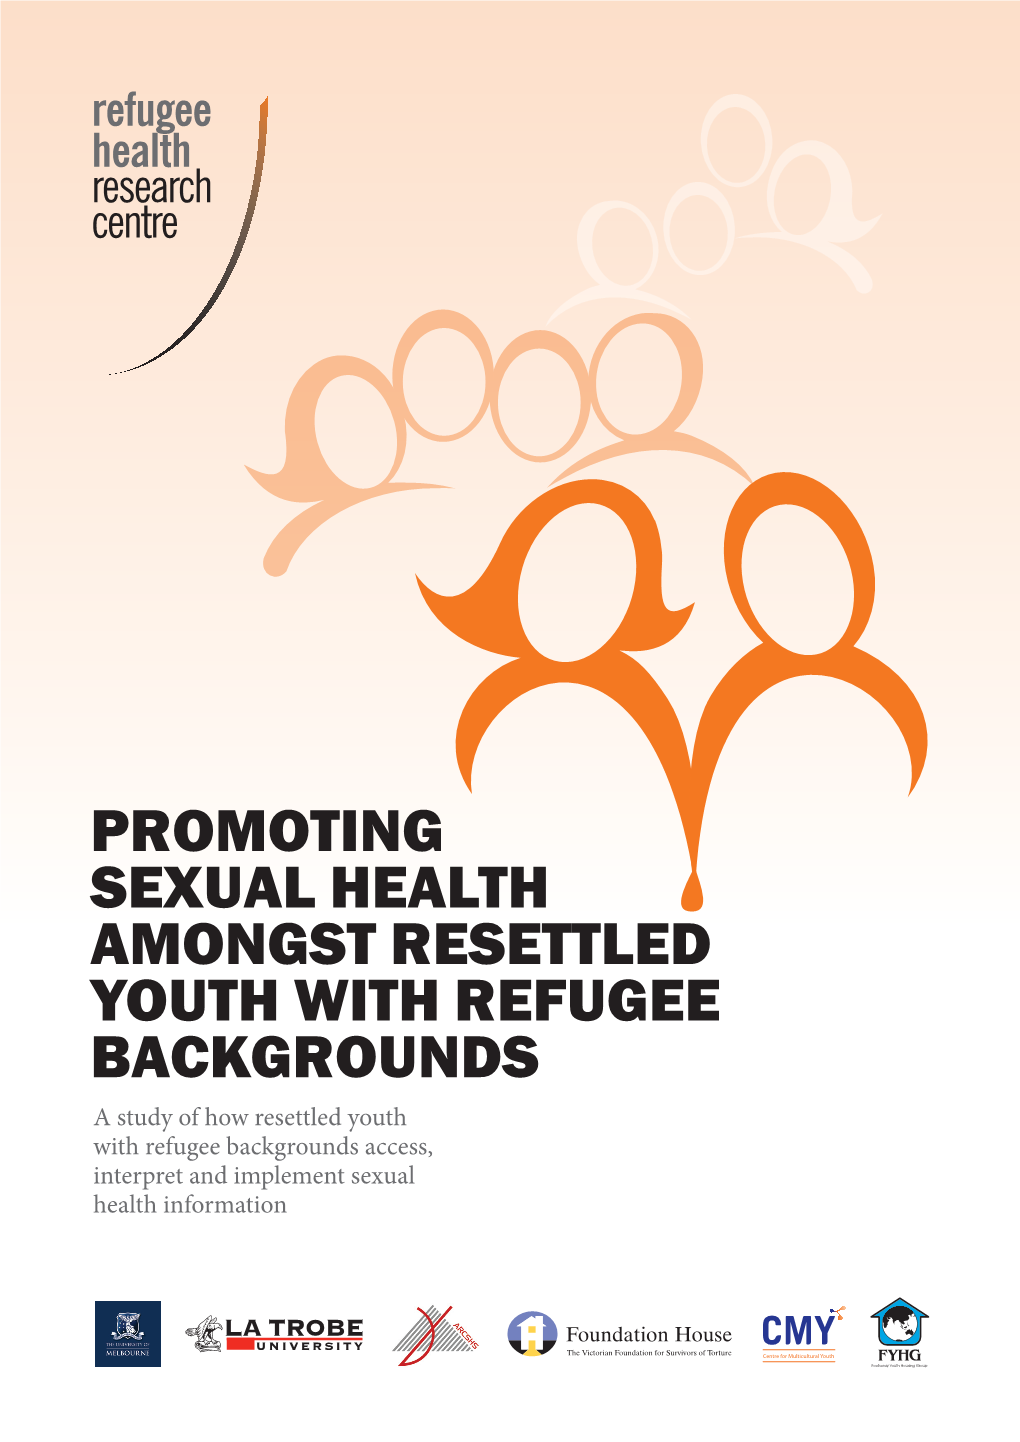 Promoting Sexual Health Amongst Resettled Youth with Refugee Backgrounds